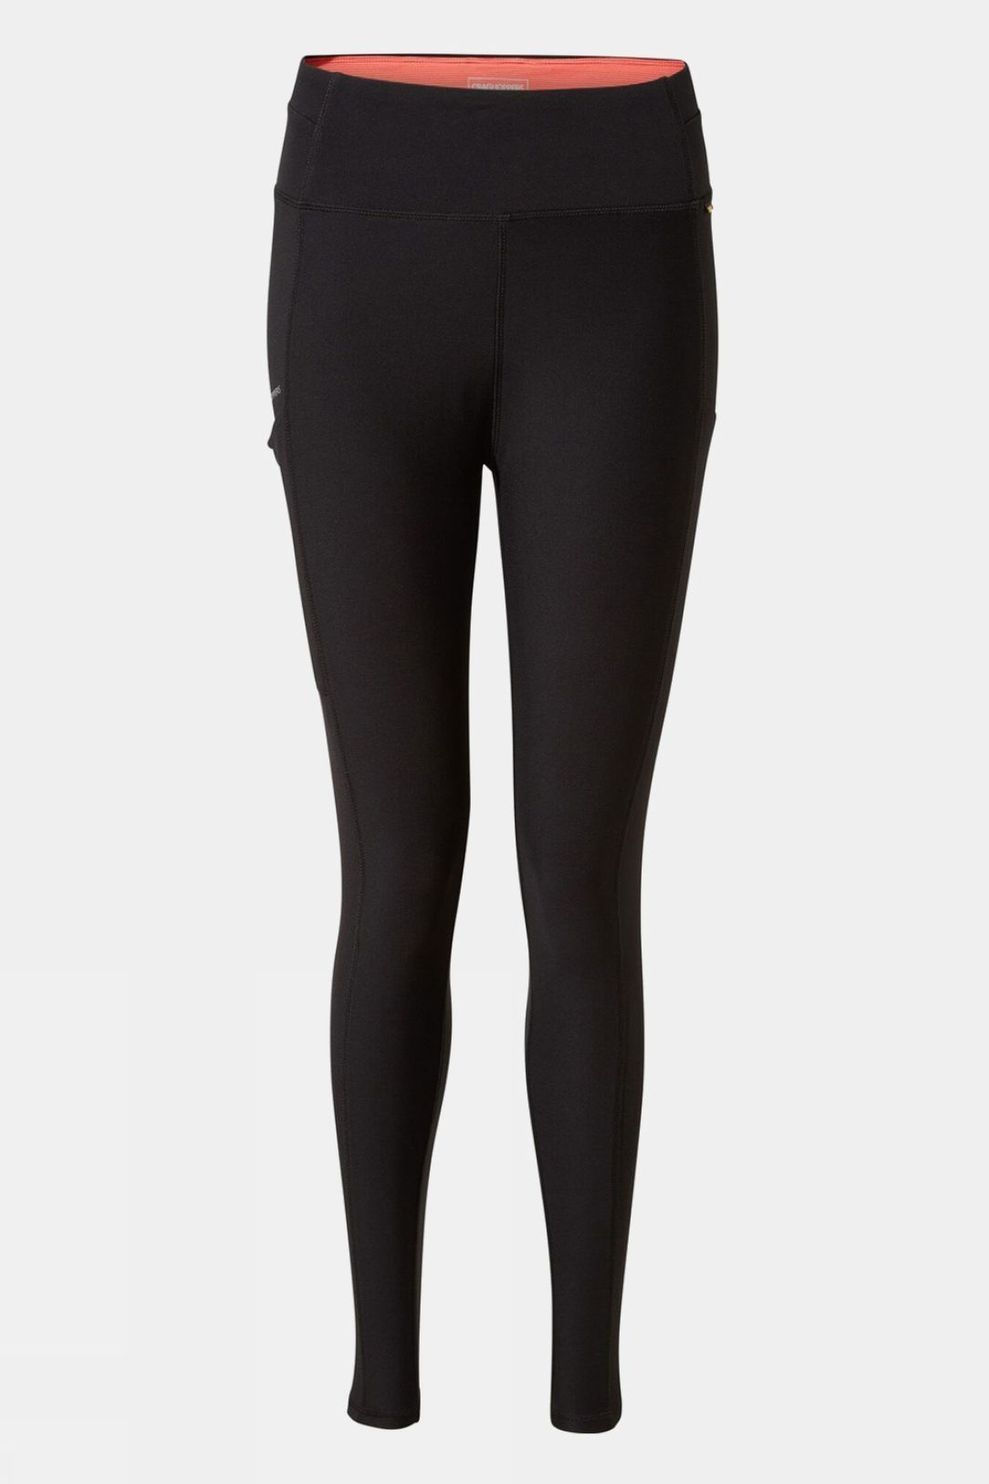 Craghoppers Womens Velocity Tights